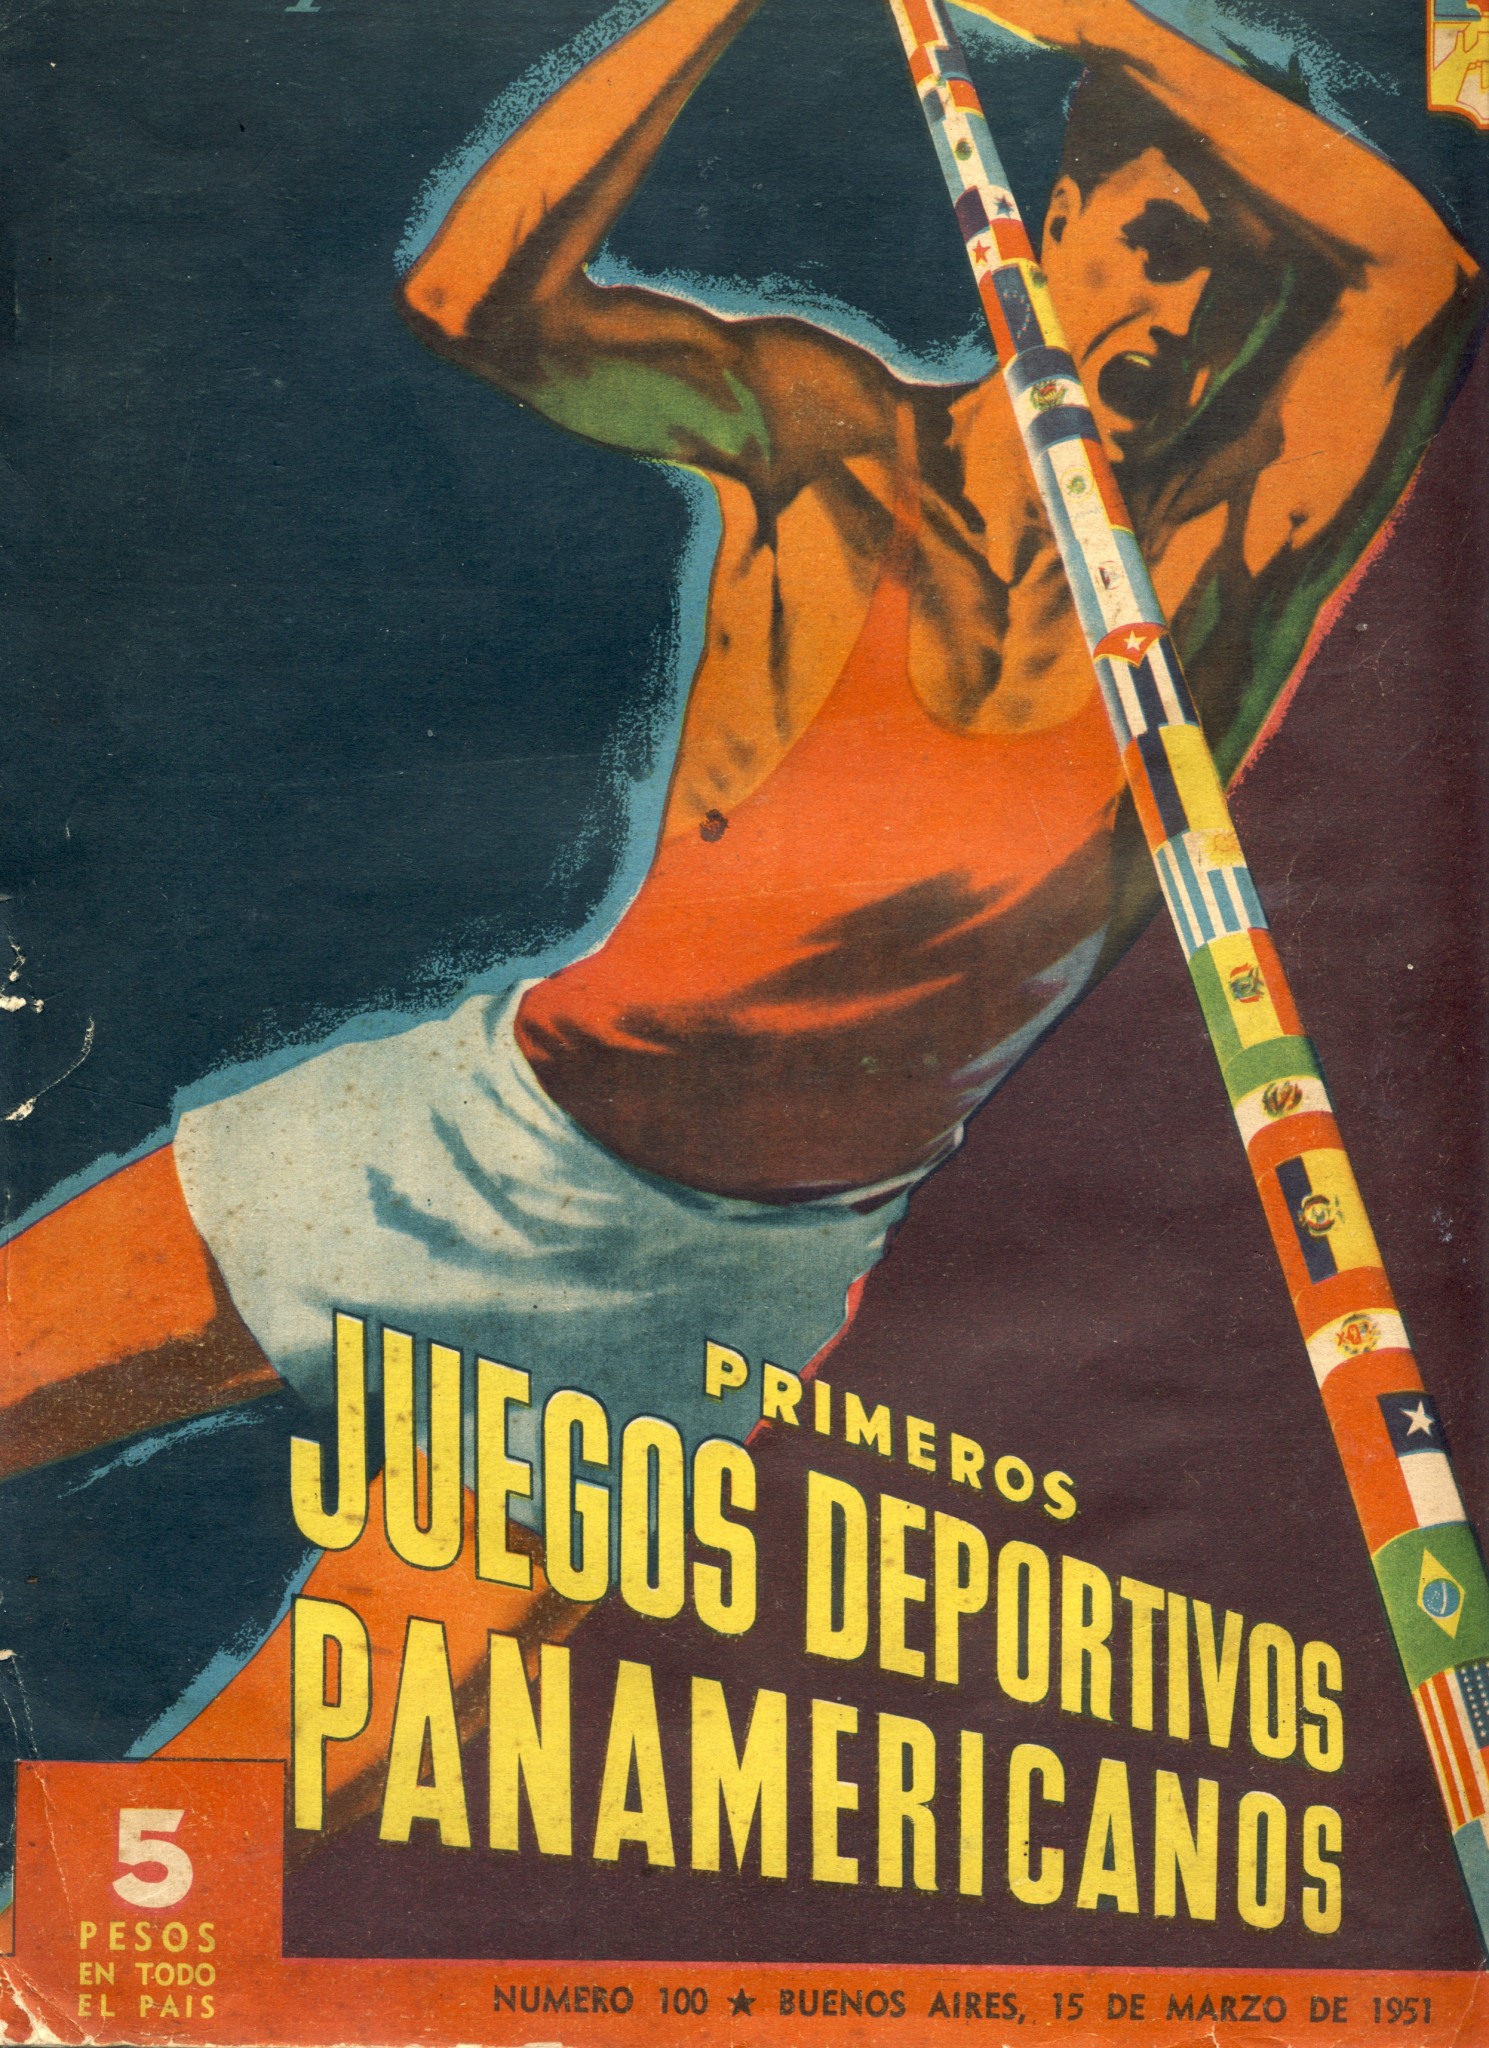 The 1951 Pan Am Games poster depicted on a magazine cover ©Philip Barker